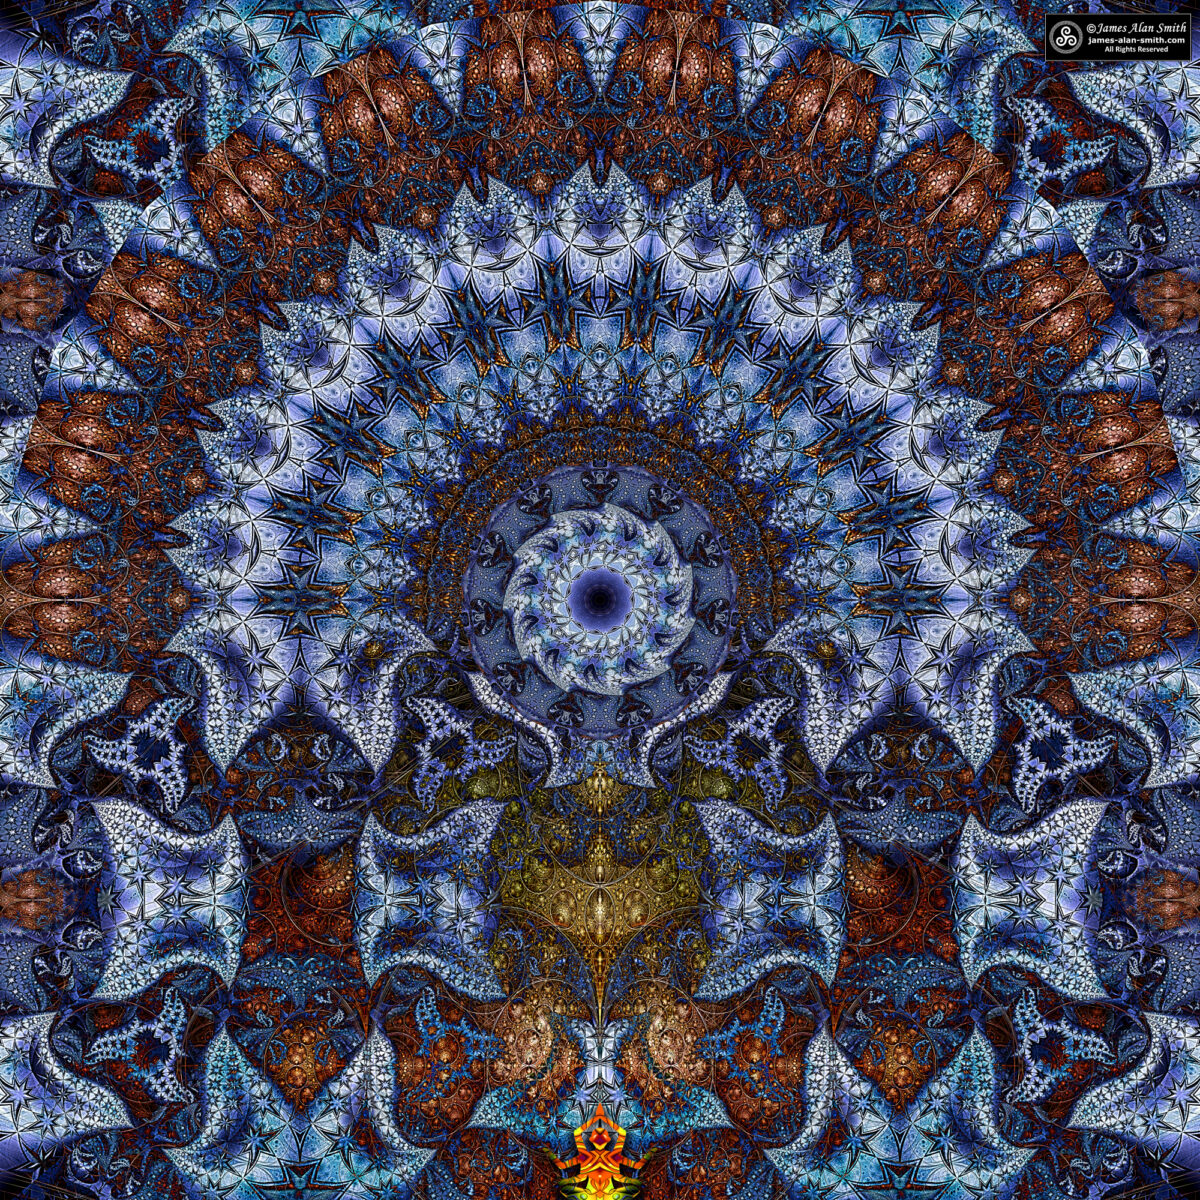 Meditations at the Portal of Enlightenment: Artwork by James Alan Smith